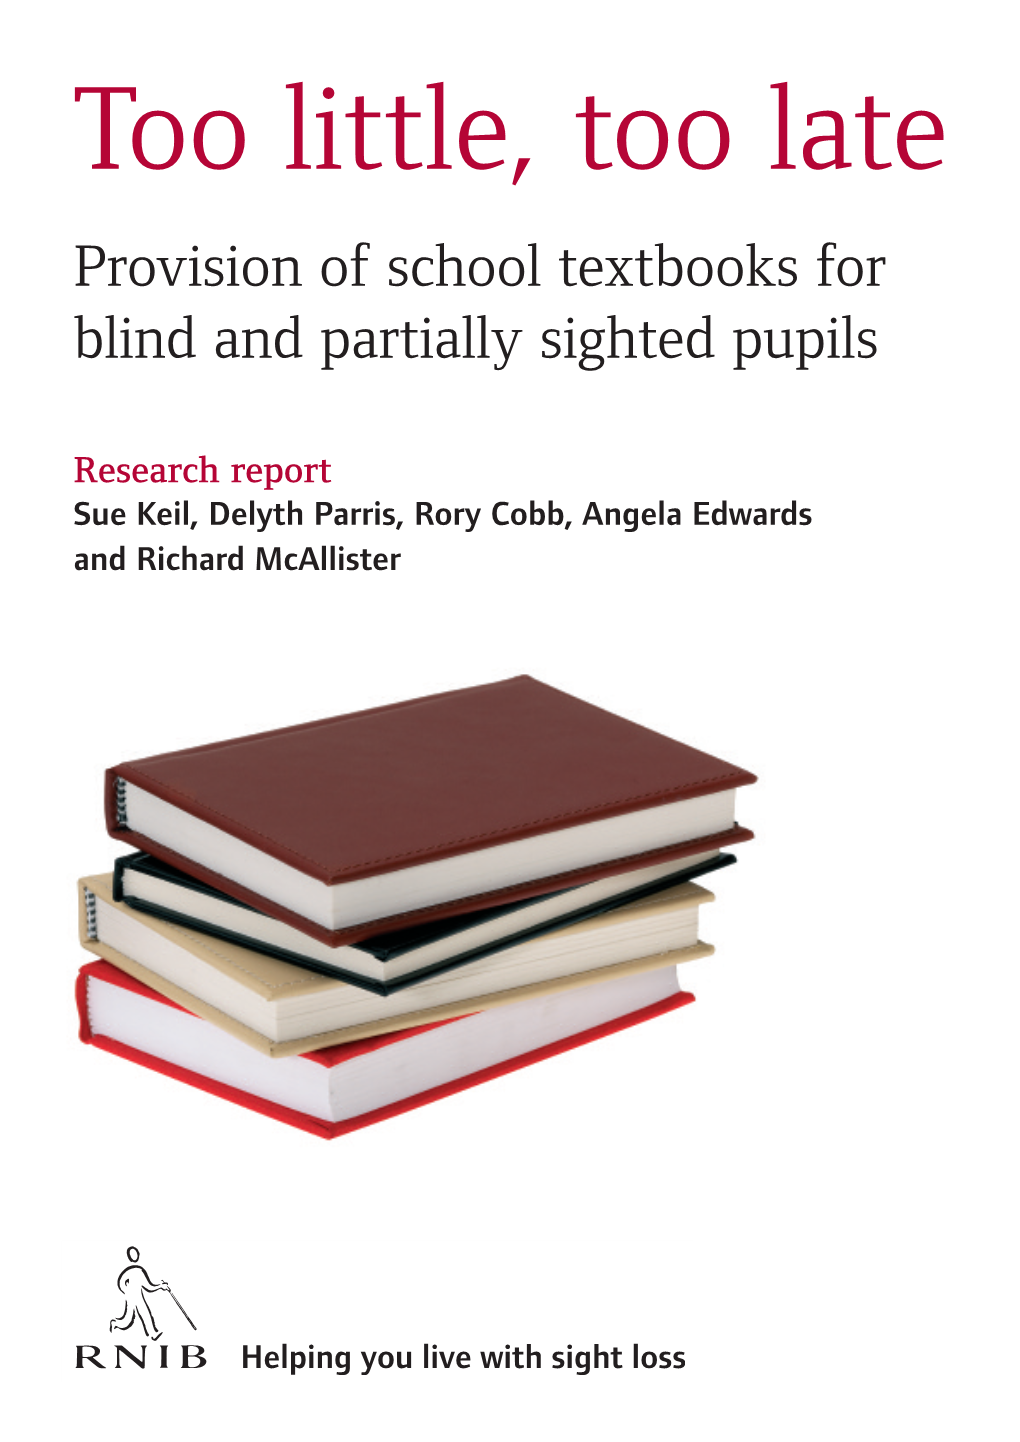 Provision of School Textbooks for Blind and Partially Sighted Pupils